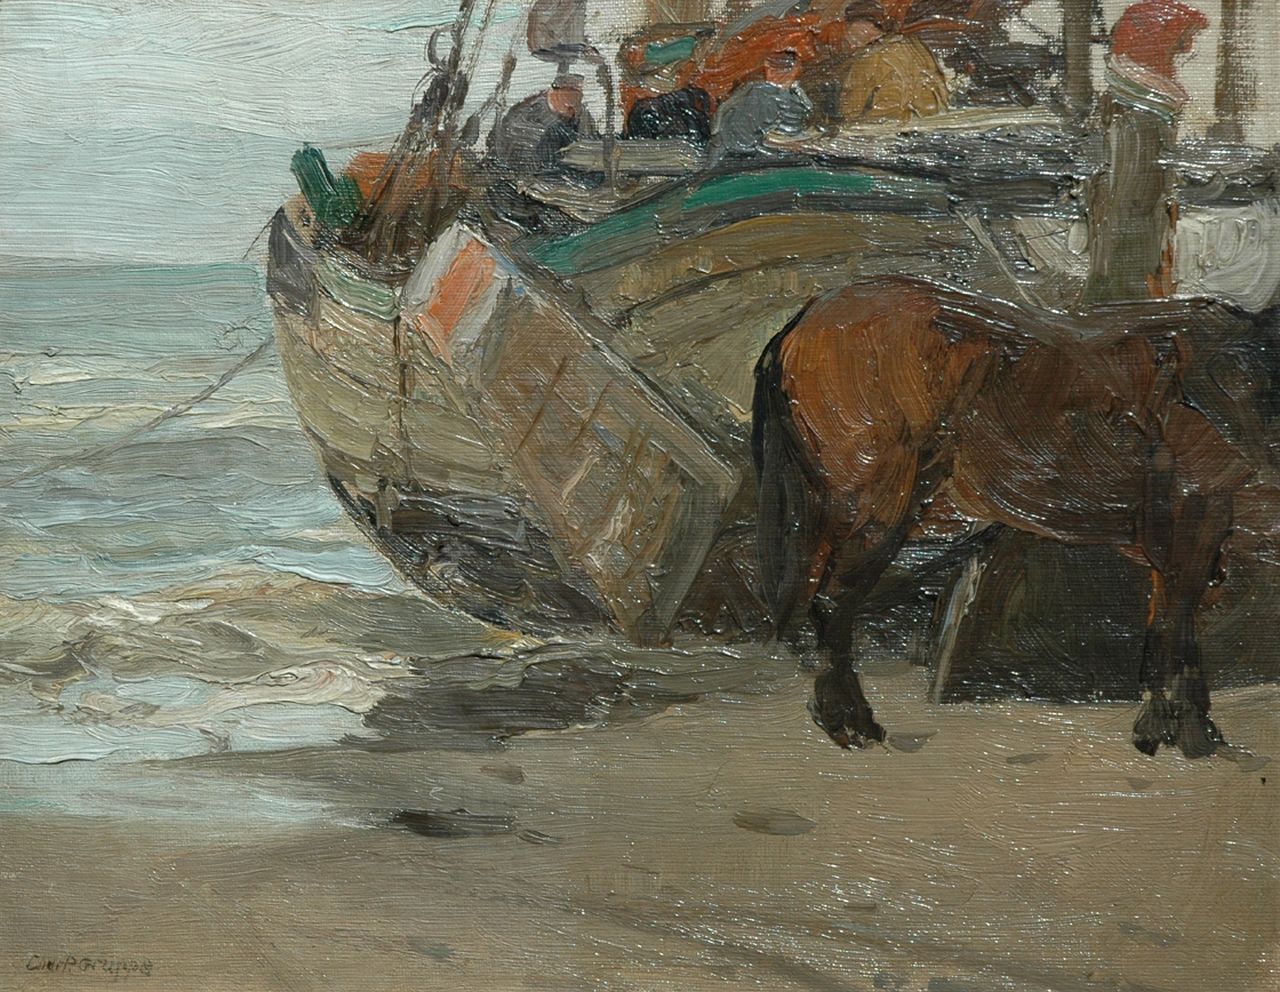 Gruppe C.P.  | Charles Paul Gruppe, A fishingbarge on the beach, oil on canvas laid down on painter's board 25.3 x 32.1 cm, signed l.l.